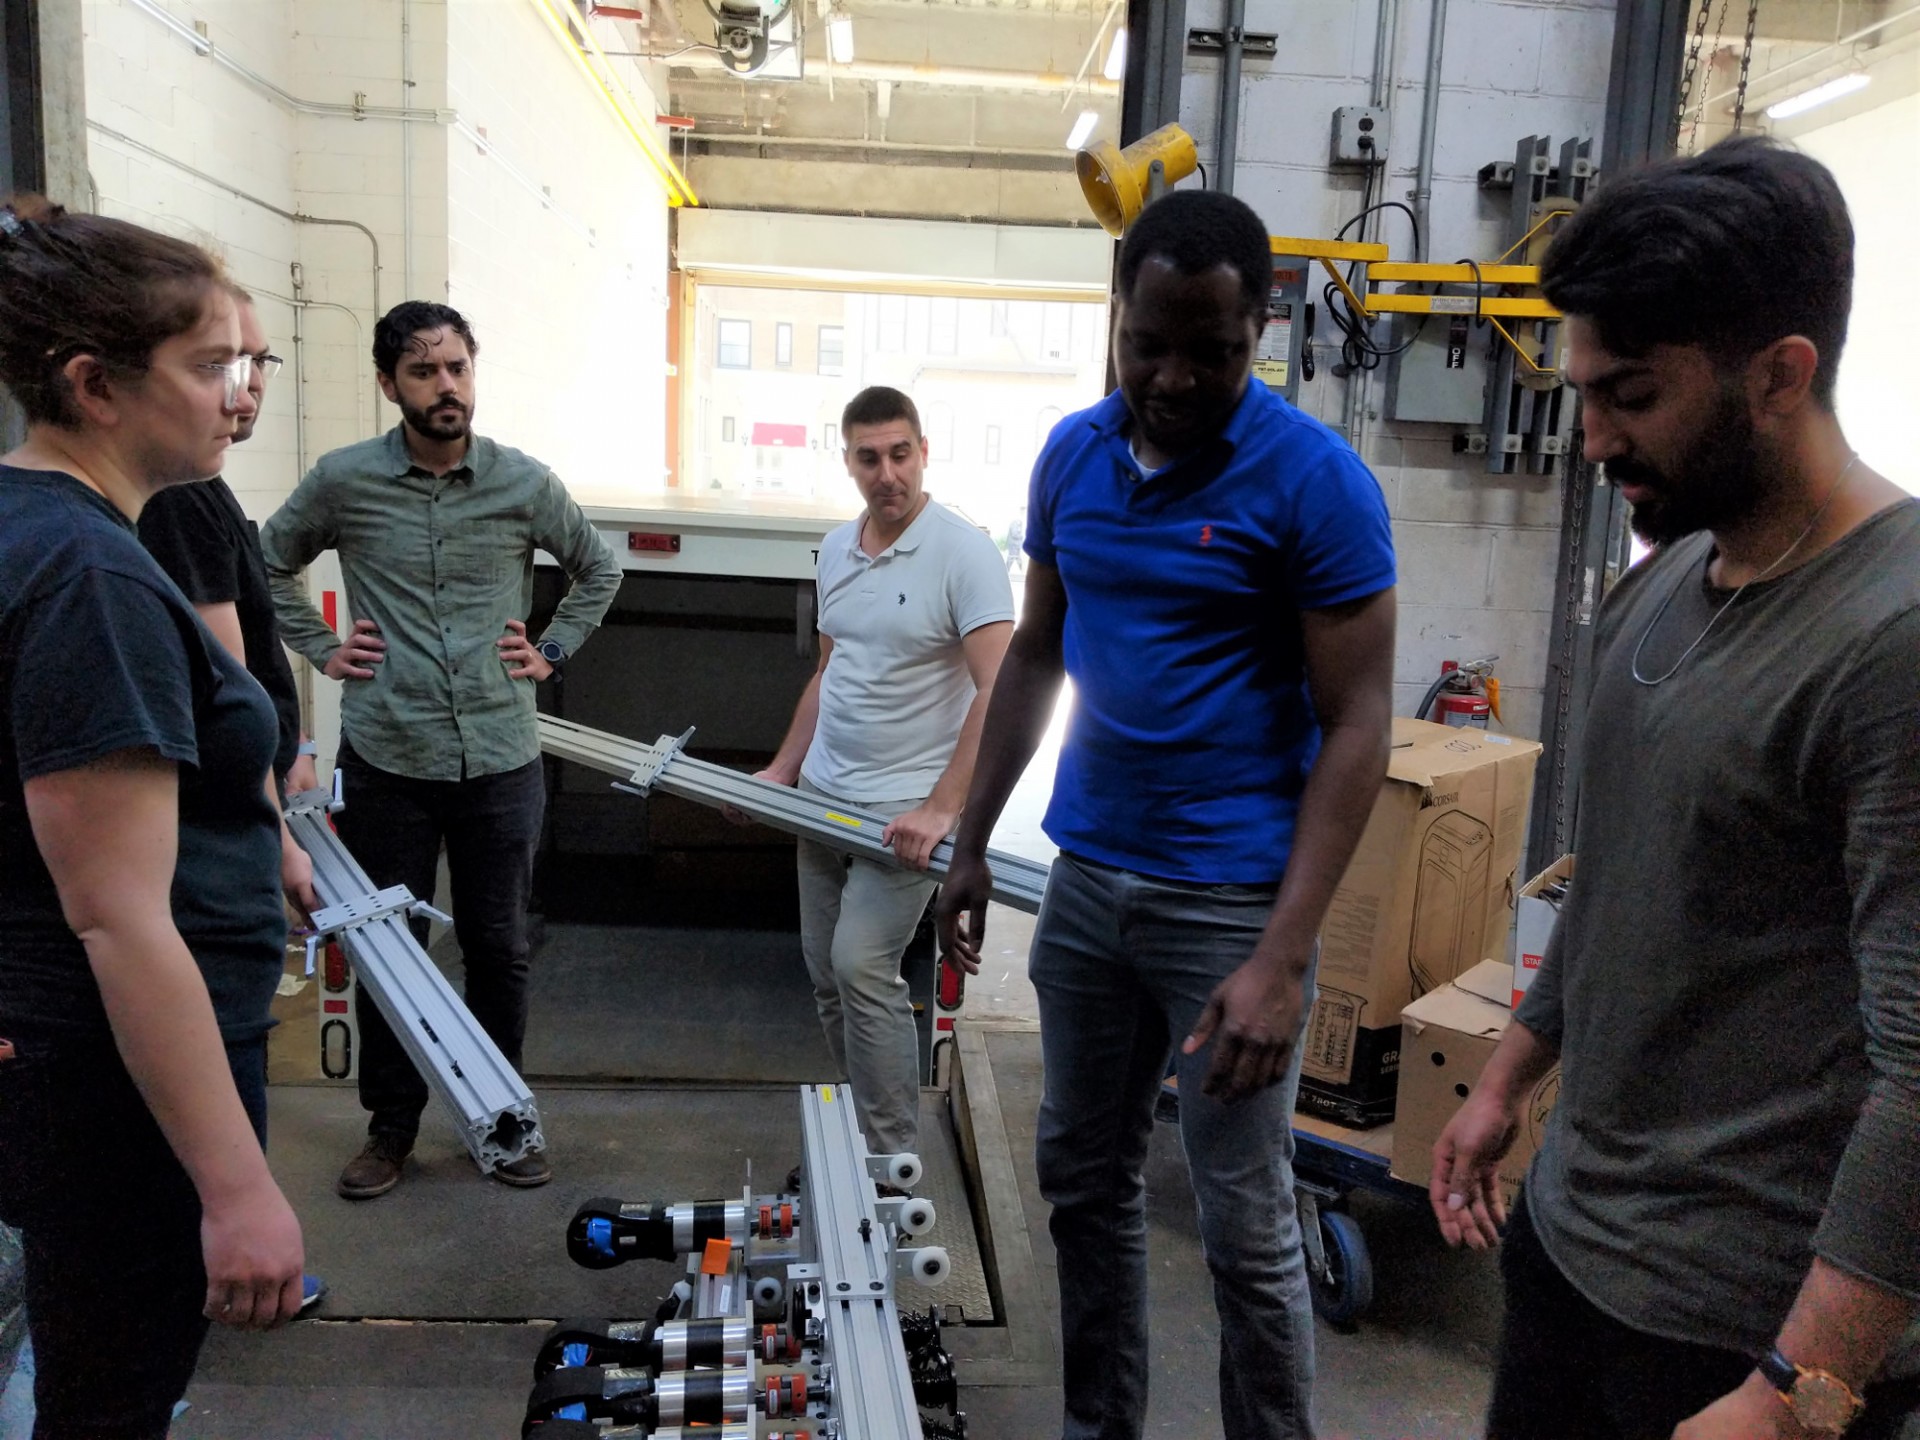 The team is preparing to lift the motors, it took many hands to transport the entire device. 